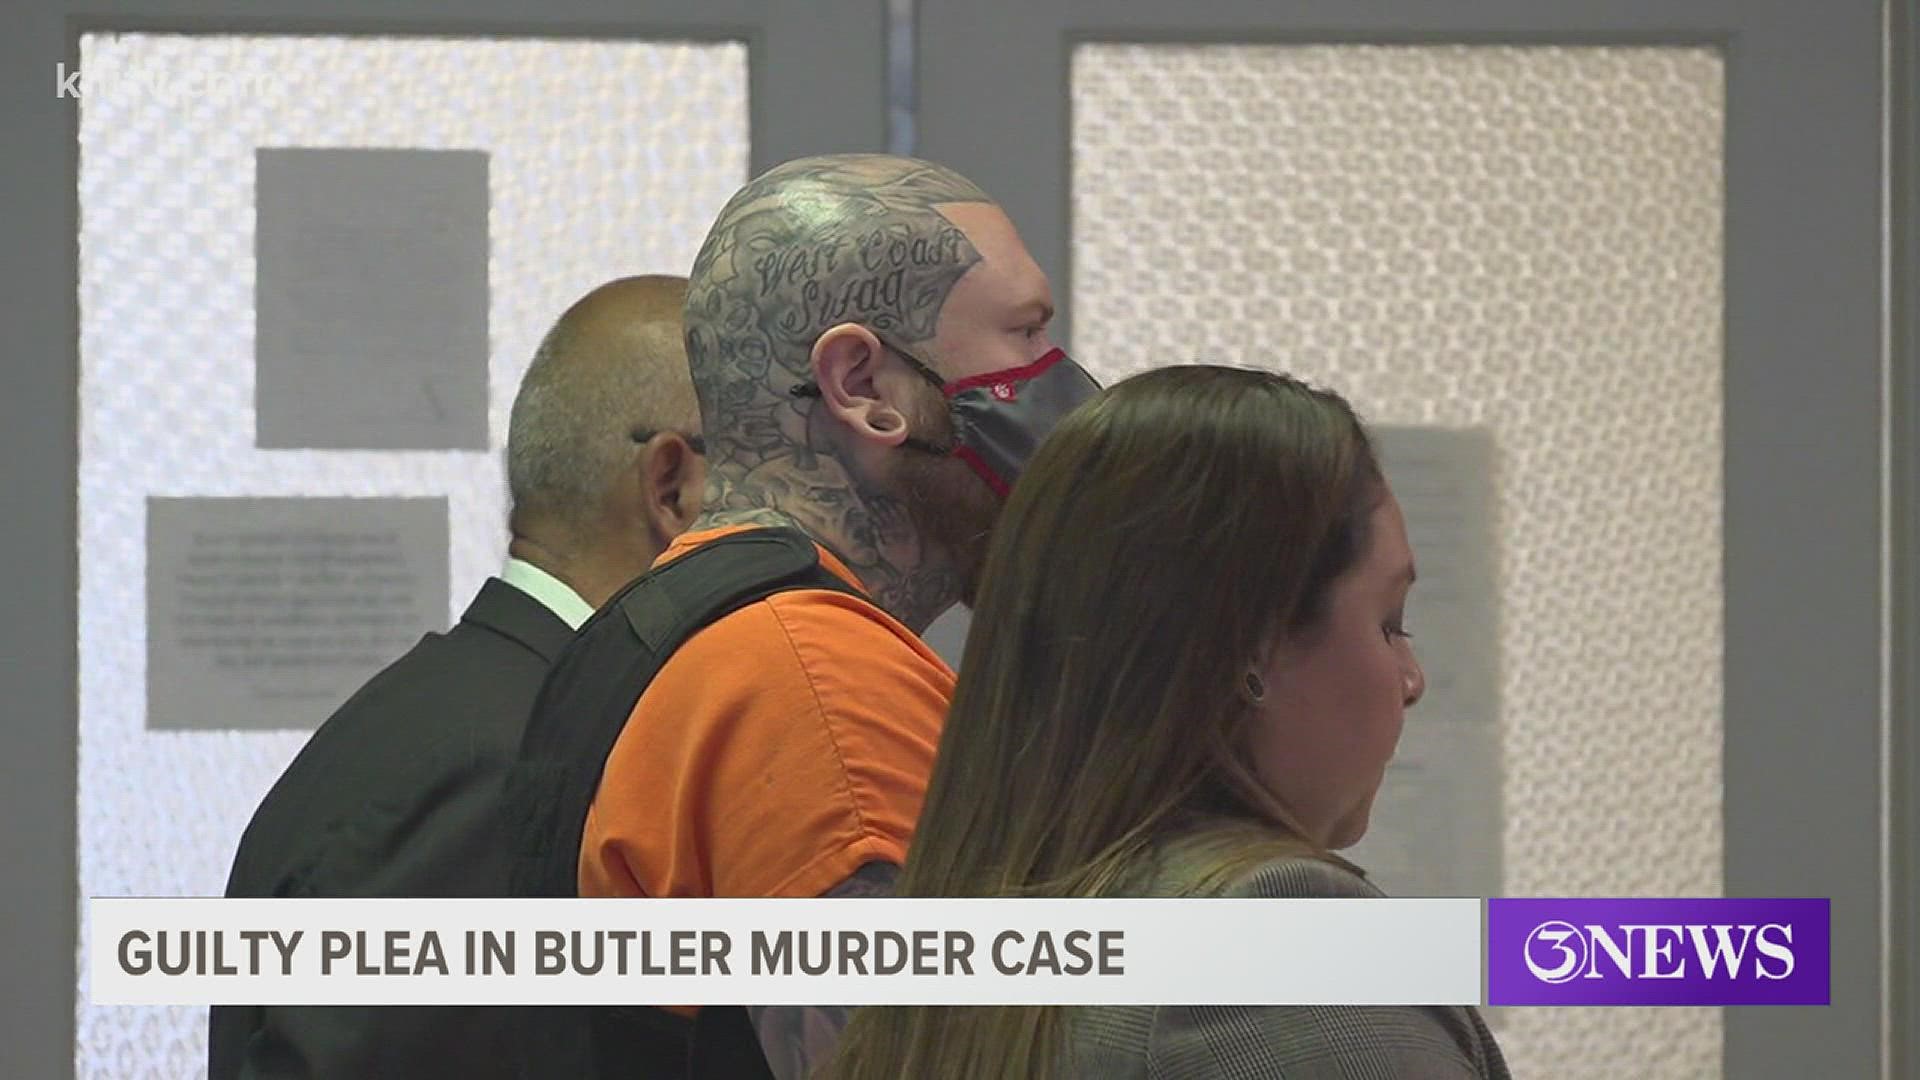 Williams and his girlfriend Amanda Noverr were both indicted for capital murder after the 2019 killings of a New Hampshire couple.